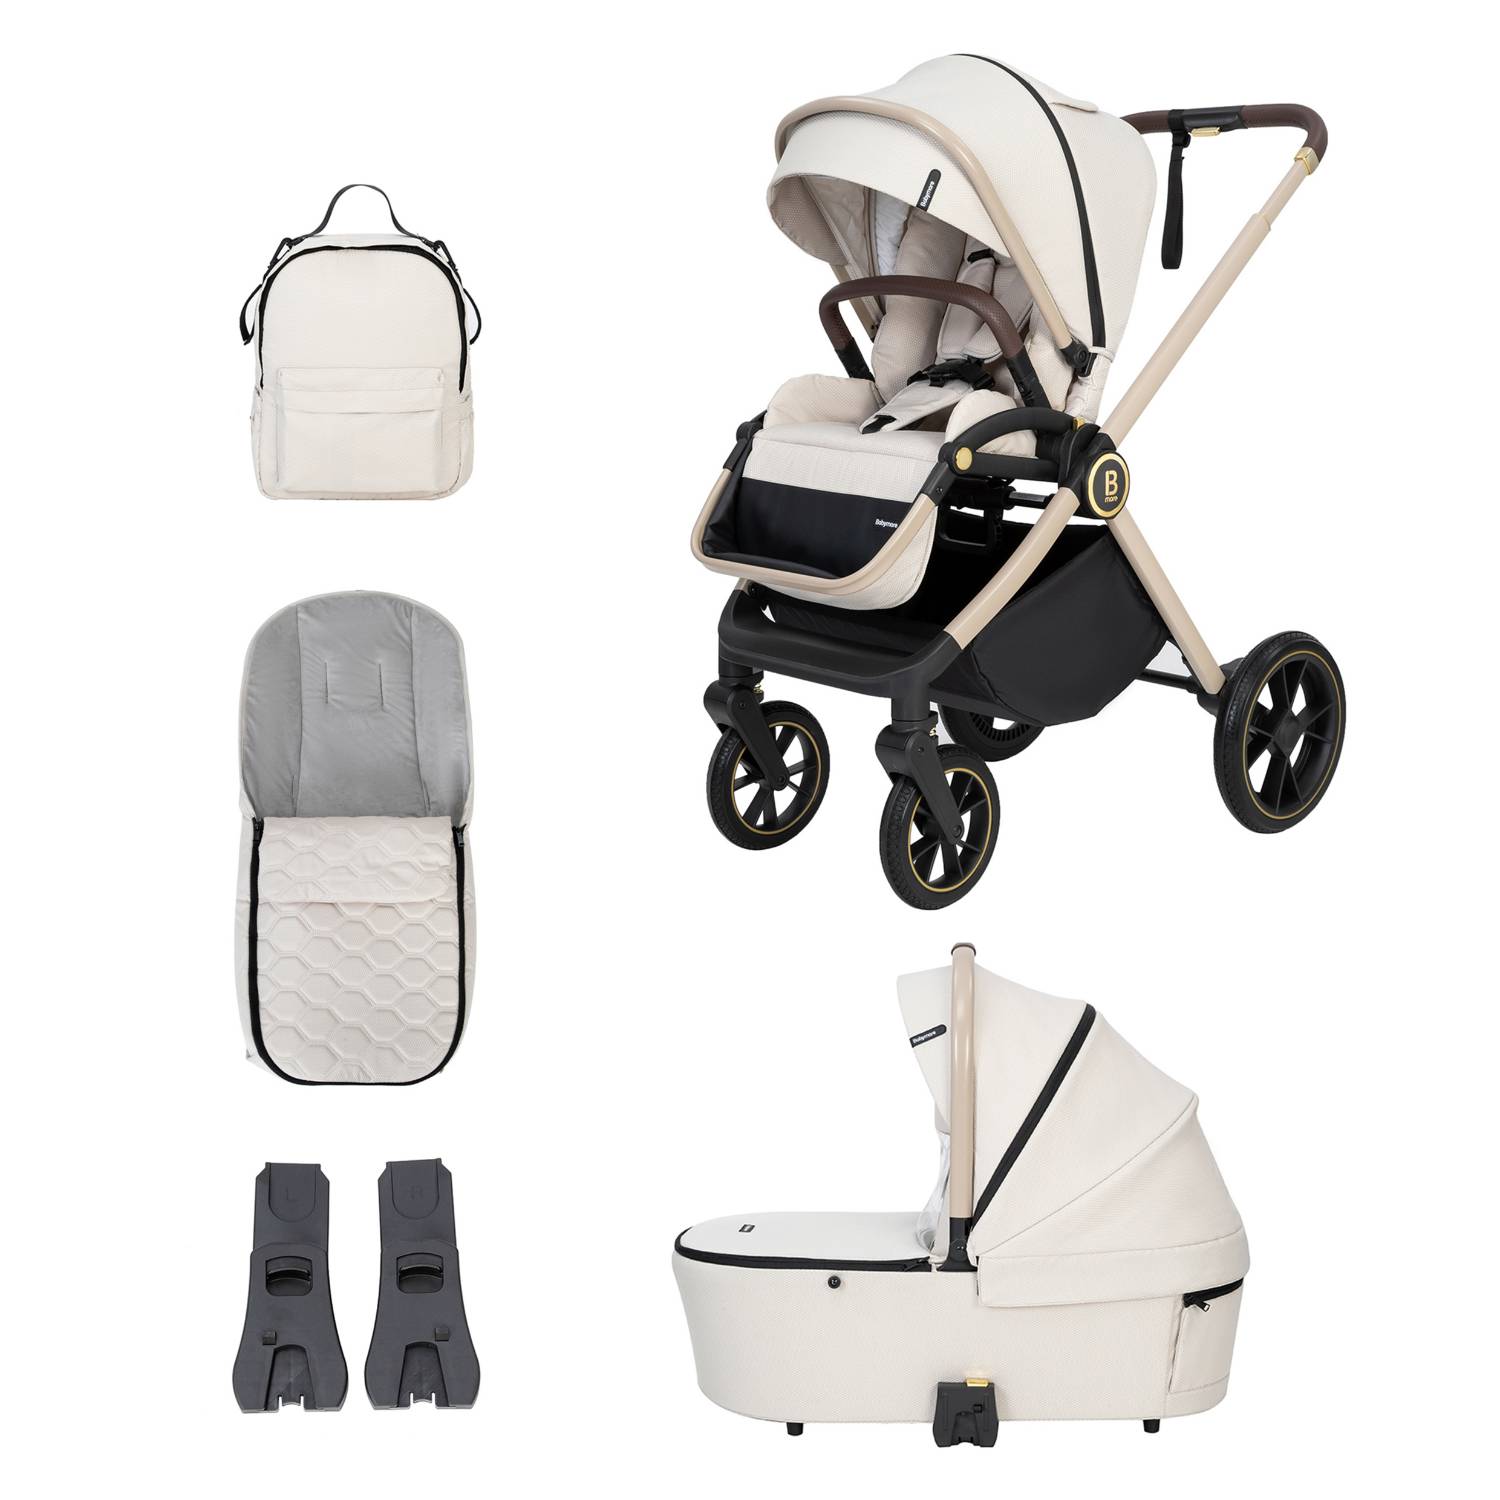 Accessories and other inclusions in the Babymore Kai 2-in-1 Pram Pushchair set